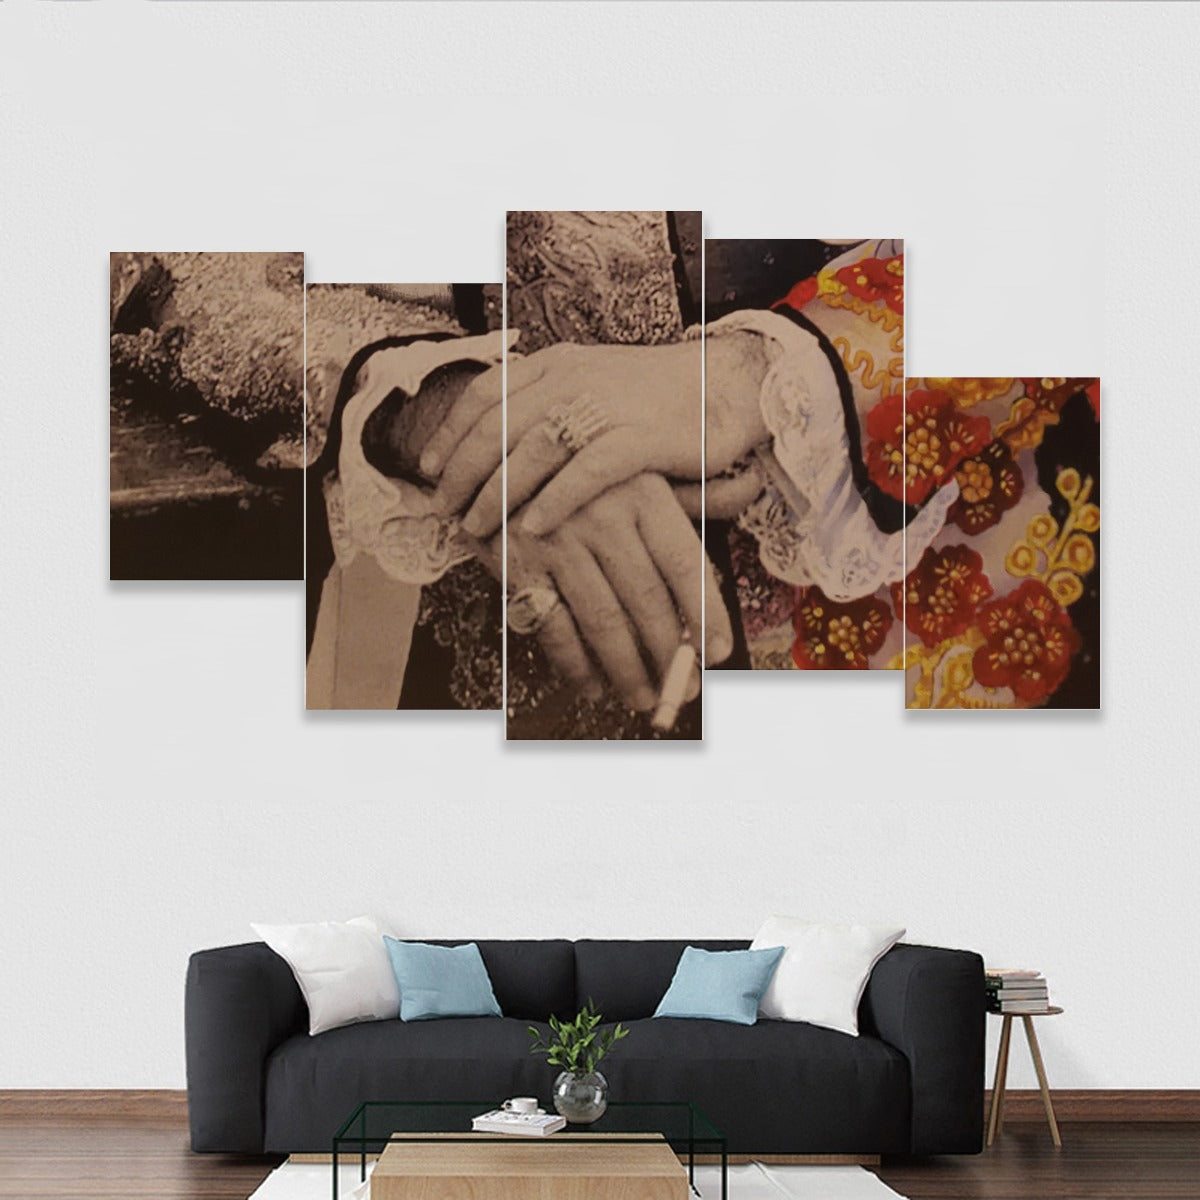 "Dichoterace" Partial on 4-panel Mural Wall Art